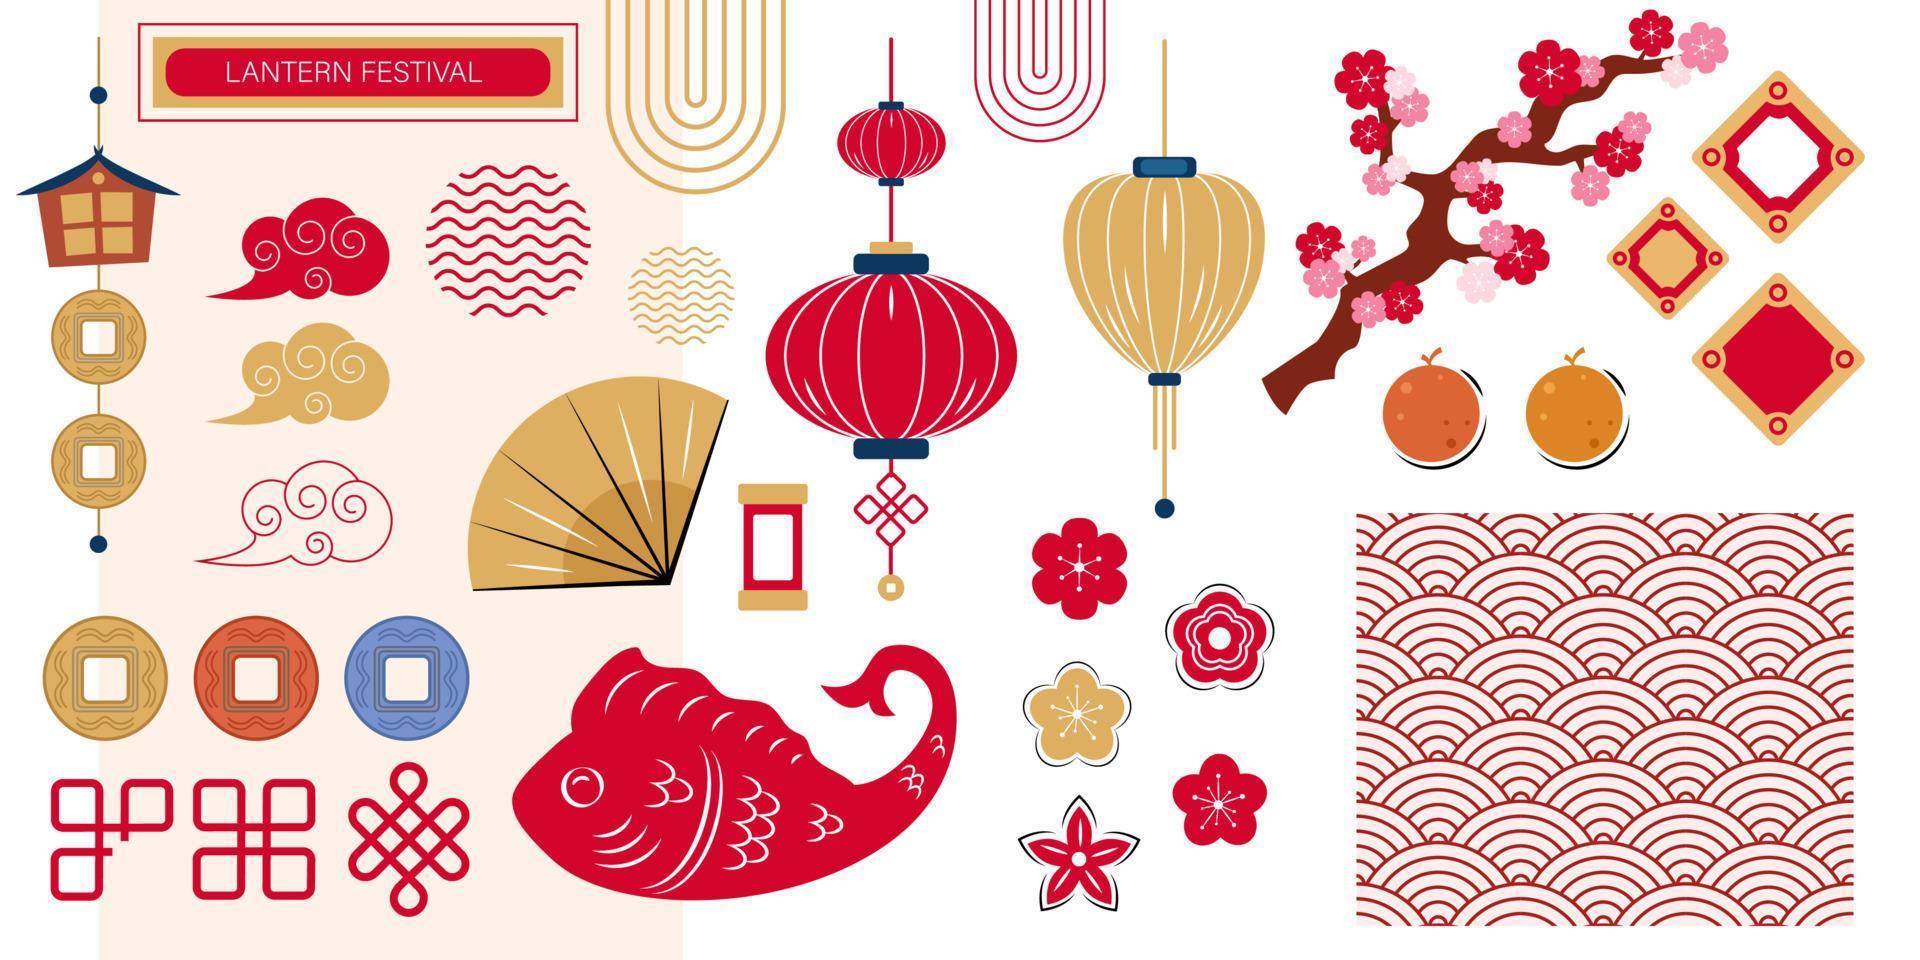 Group of asian decorative elements for holidays, Chinese New Year, Lantern festival, objects, lanterns, coins, flowers, decorative shapes and lines. vector